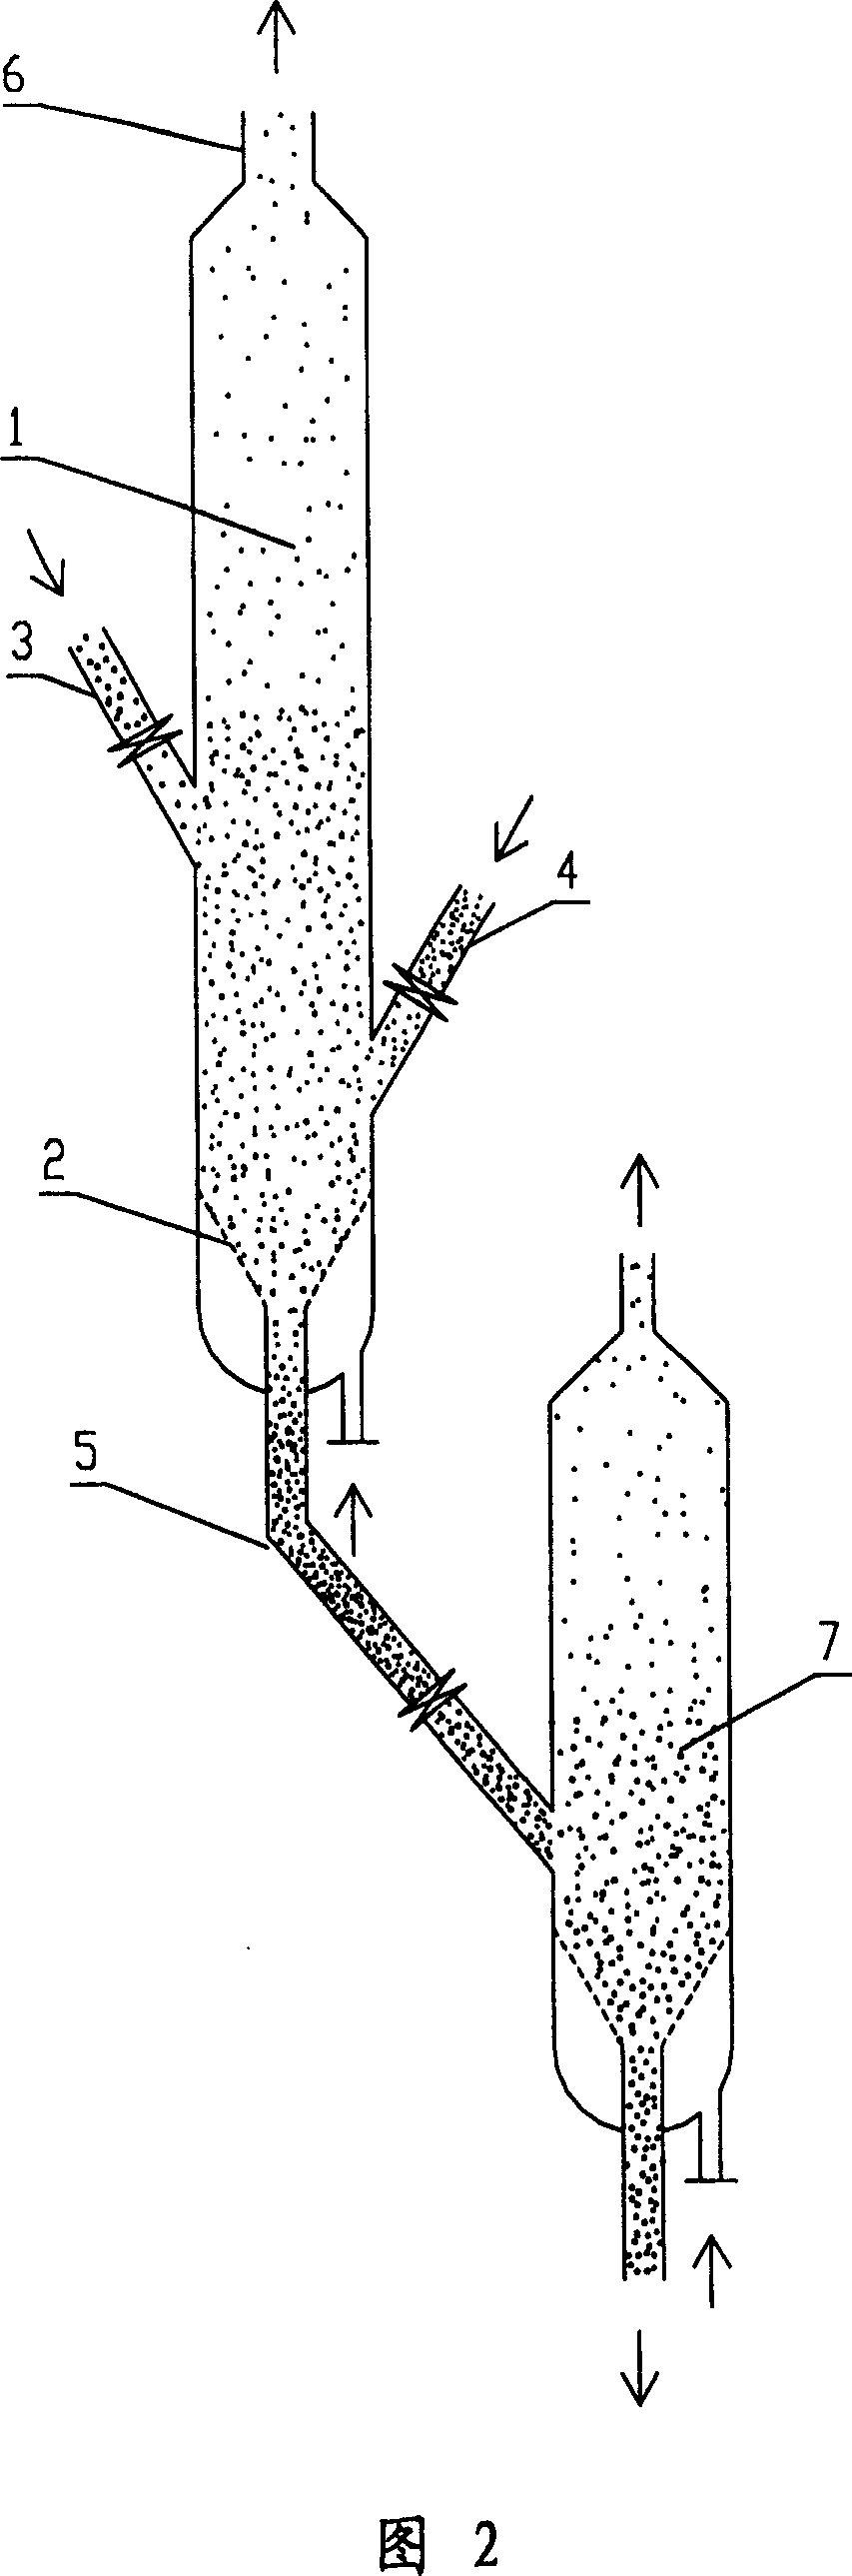 Gas-solid fluidized coupling equipment and coupling method for particle mixing-classifying by utilizing same